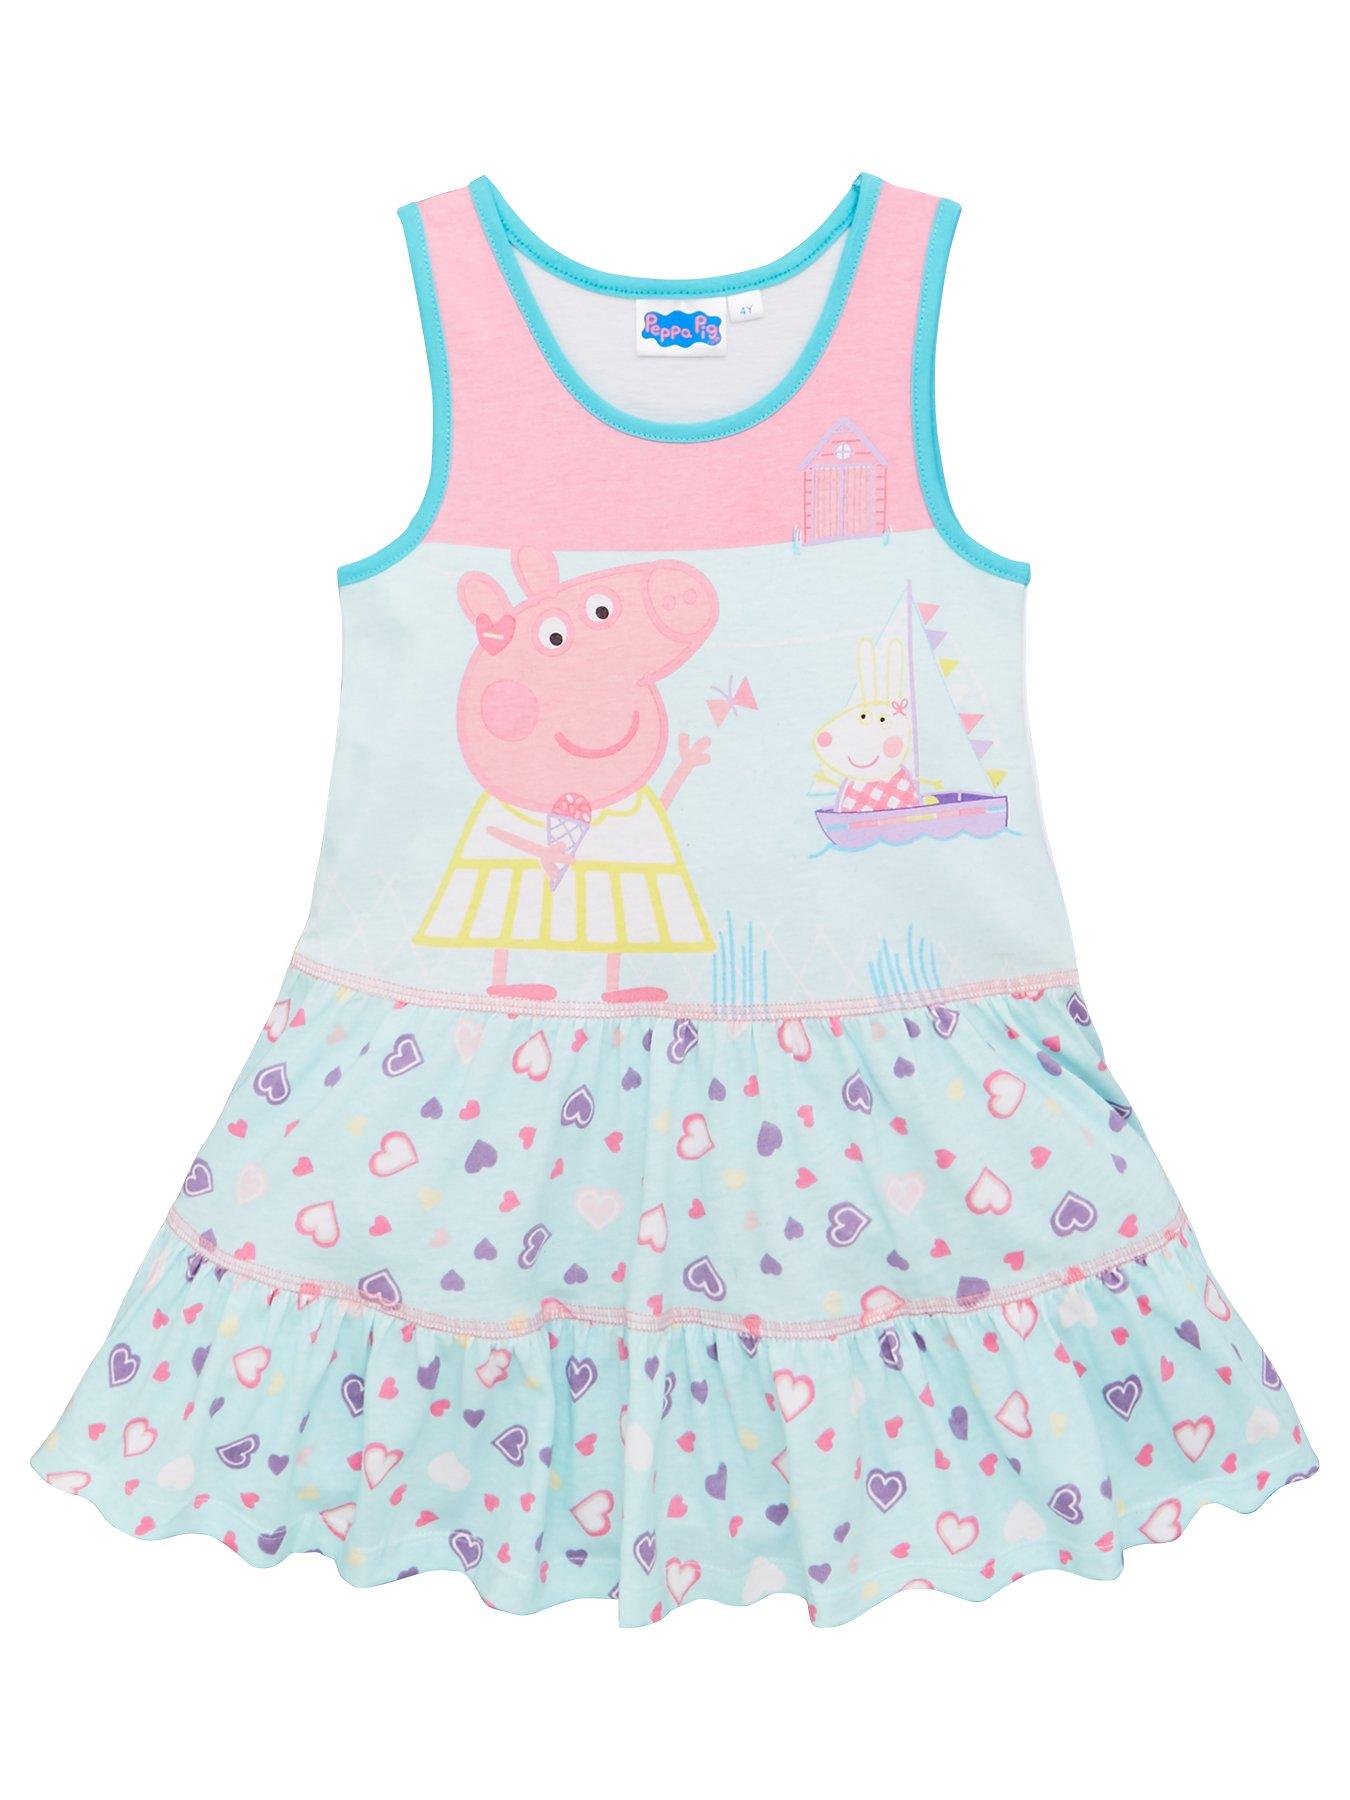 Peppa pig | Girls clothes | Child & baby | www.very.co.uk